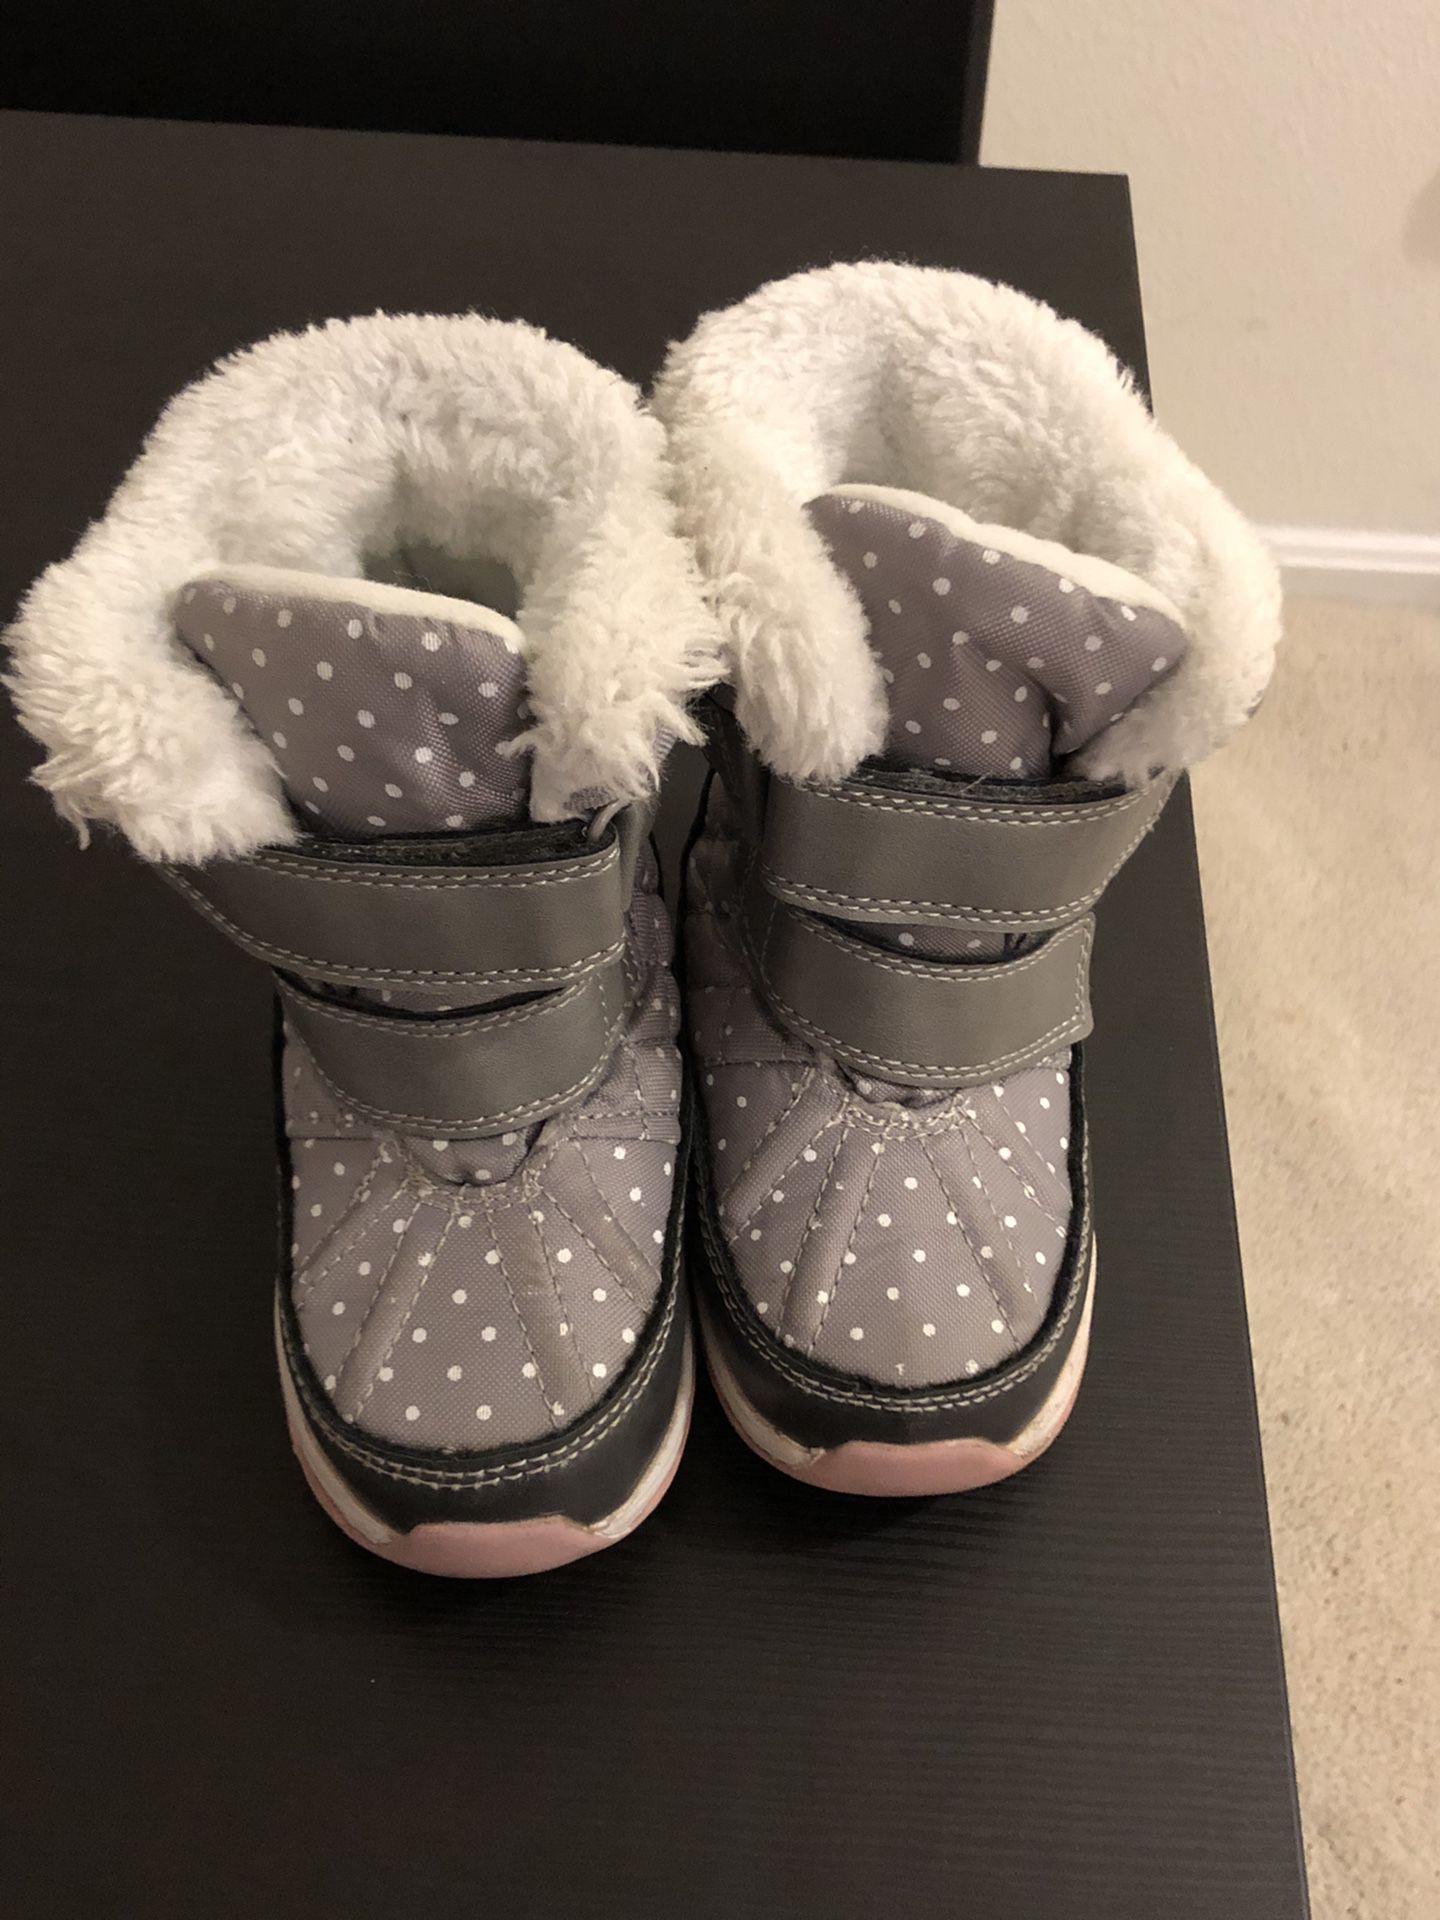 Carter's girl's snow boot size 7 US